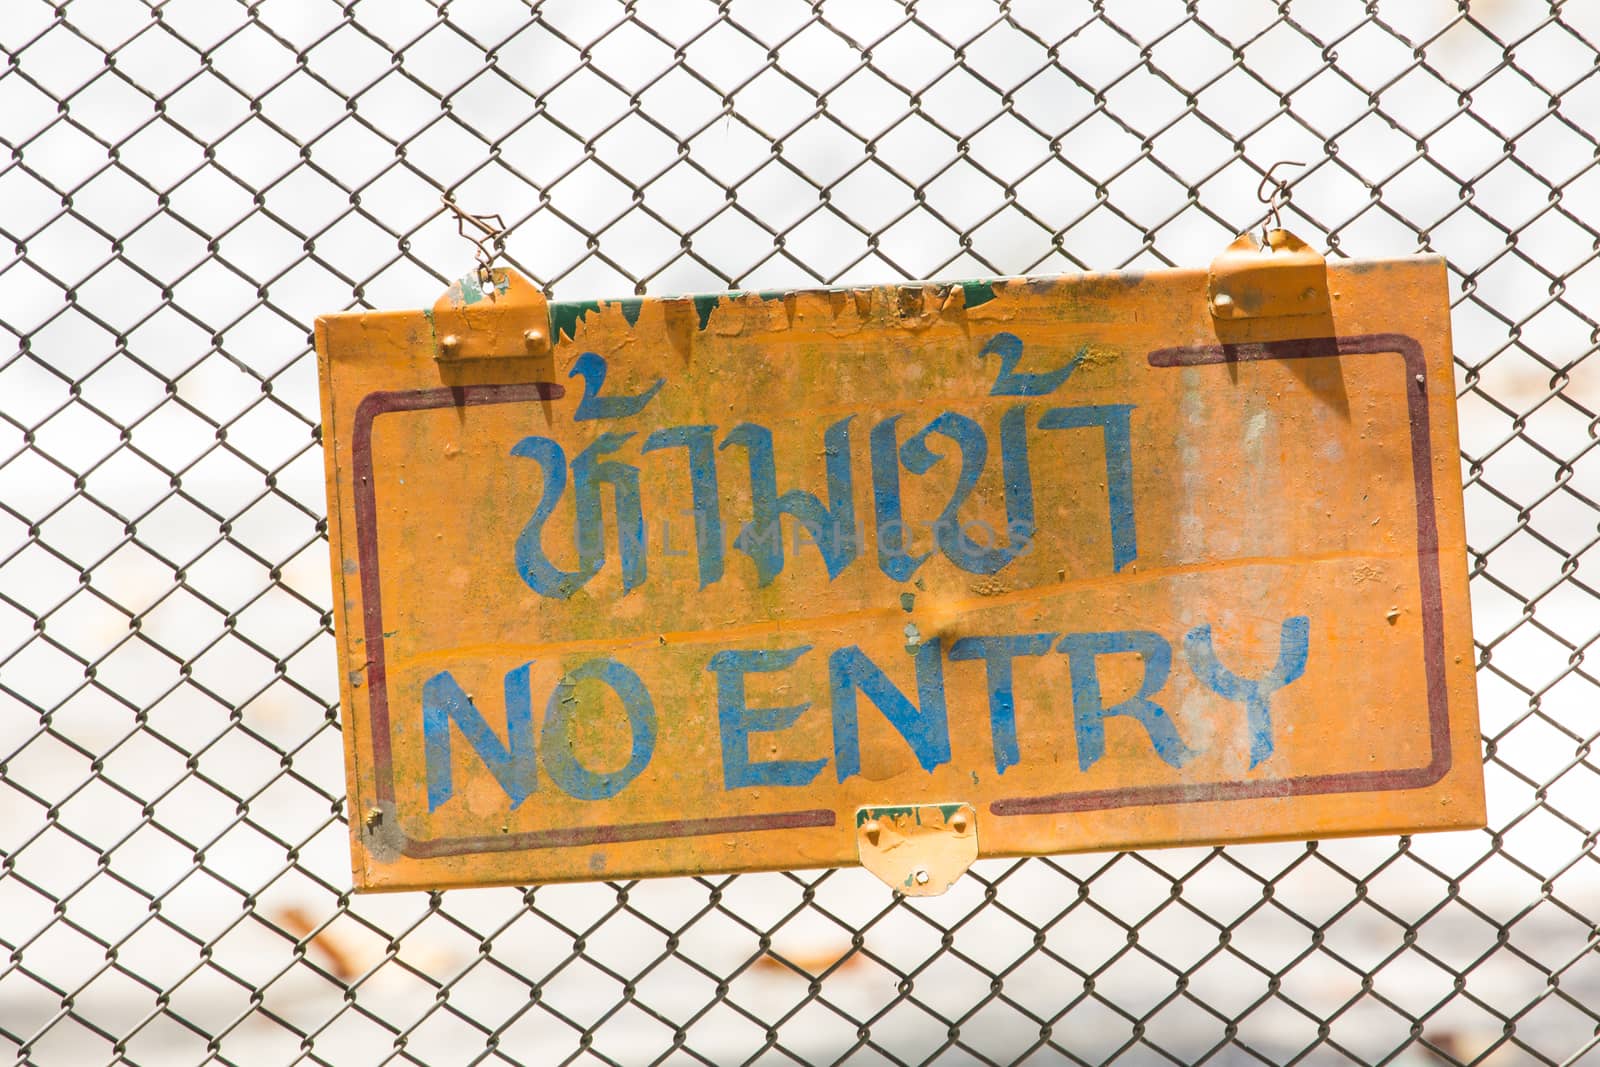 old no entry sign on mesh wire for fencing background. Thai language means No Entry